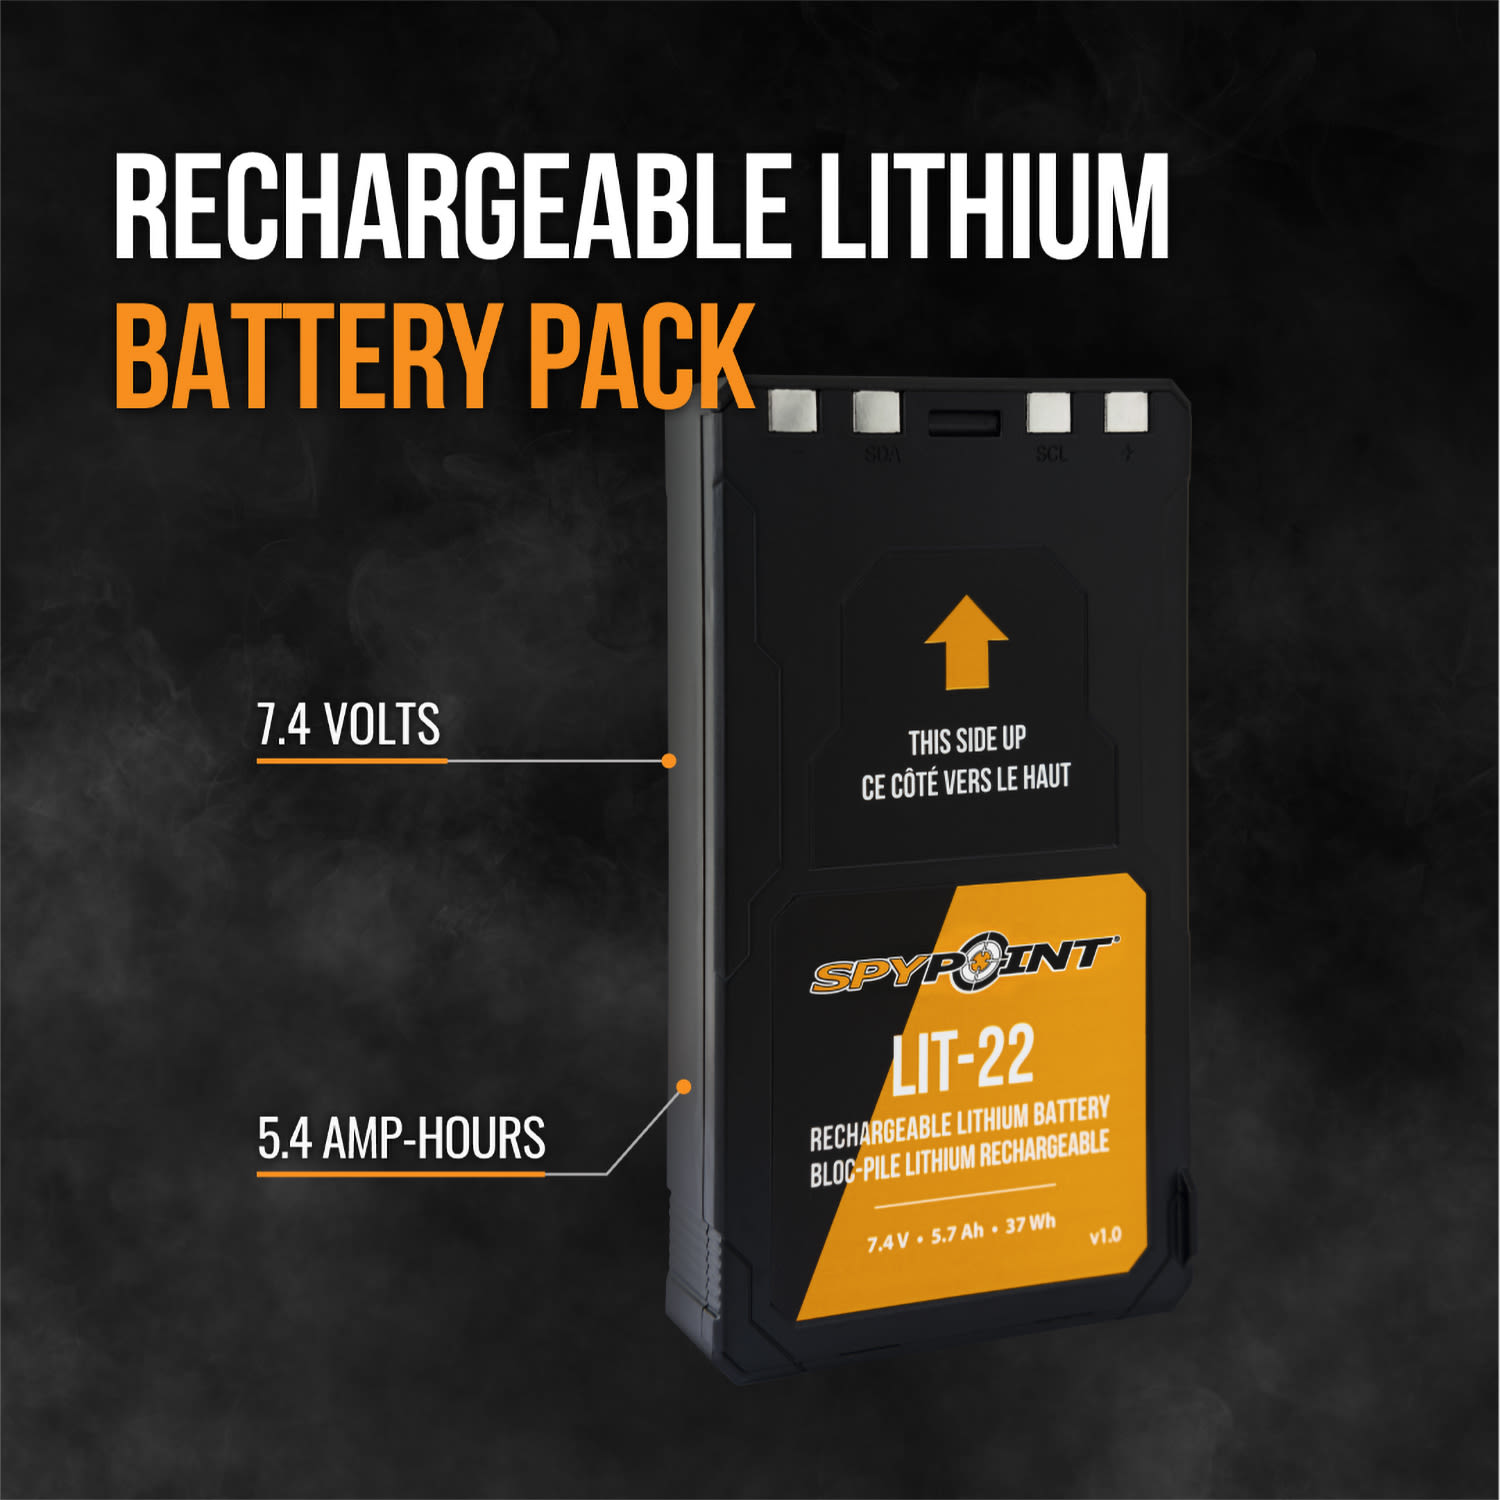 SPYPOINT® LIT-22 Rechargeable Lithium Battery Pack